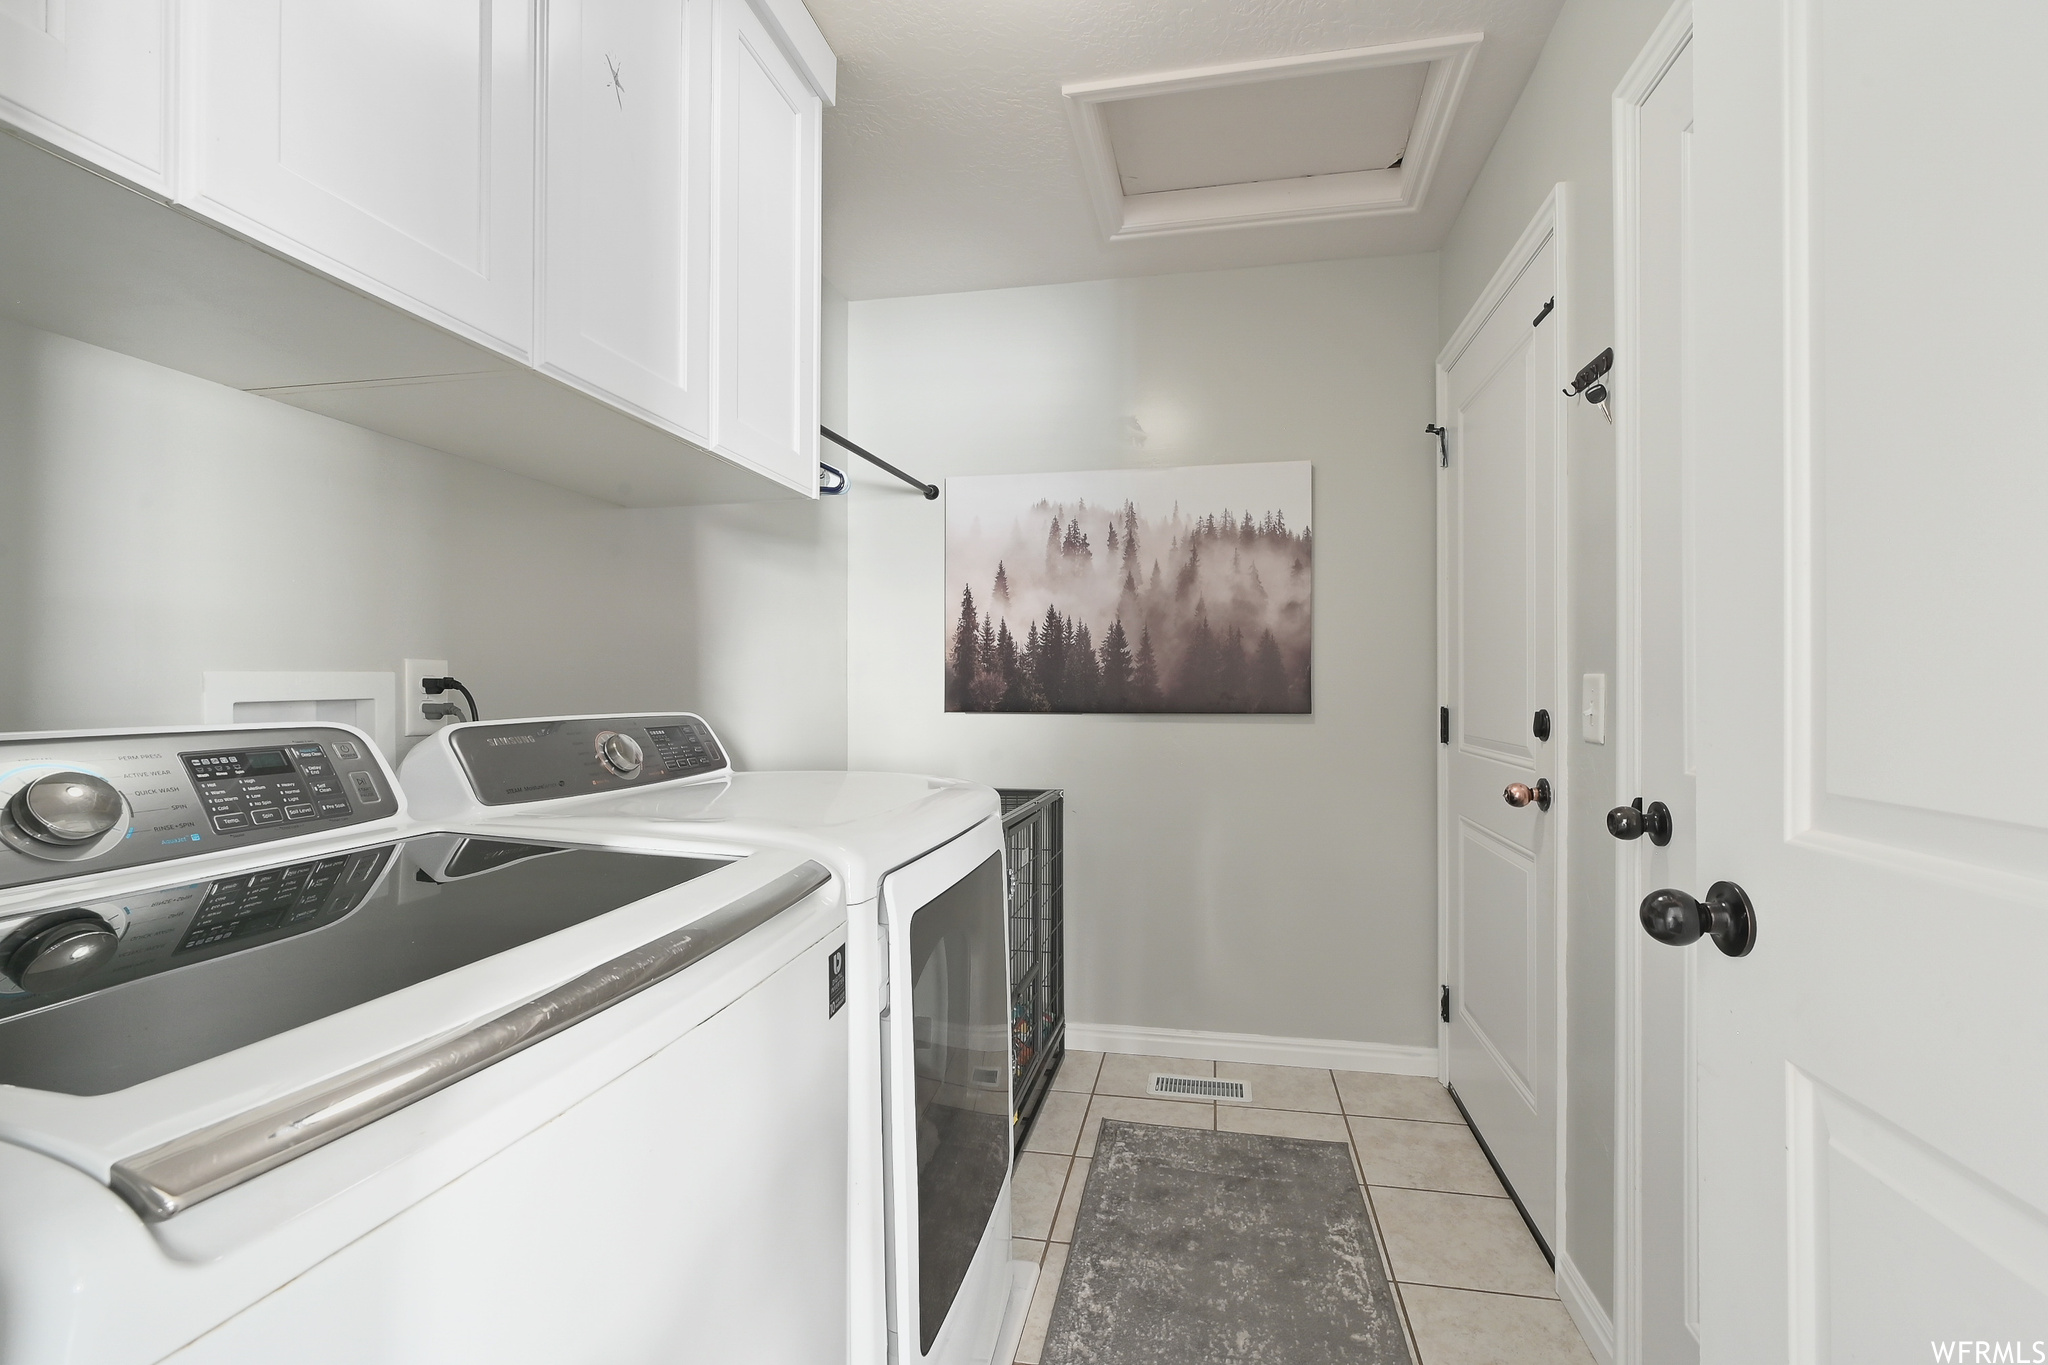 Washroom featuring washer and dryer, cabinets, and light tile floors